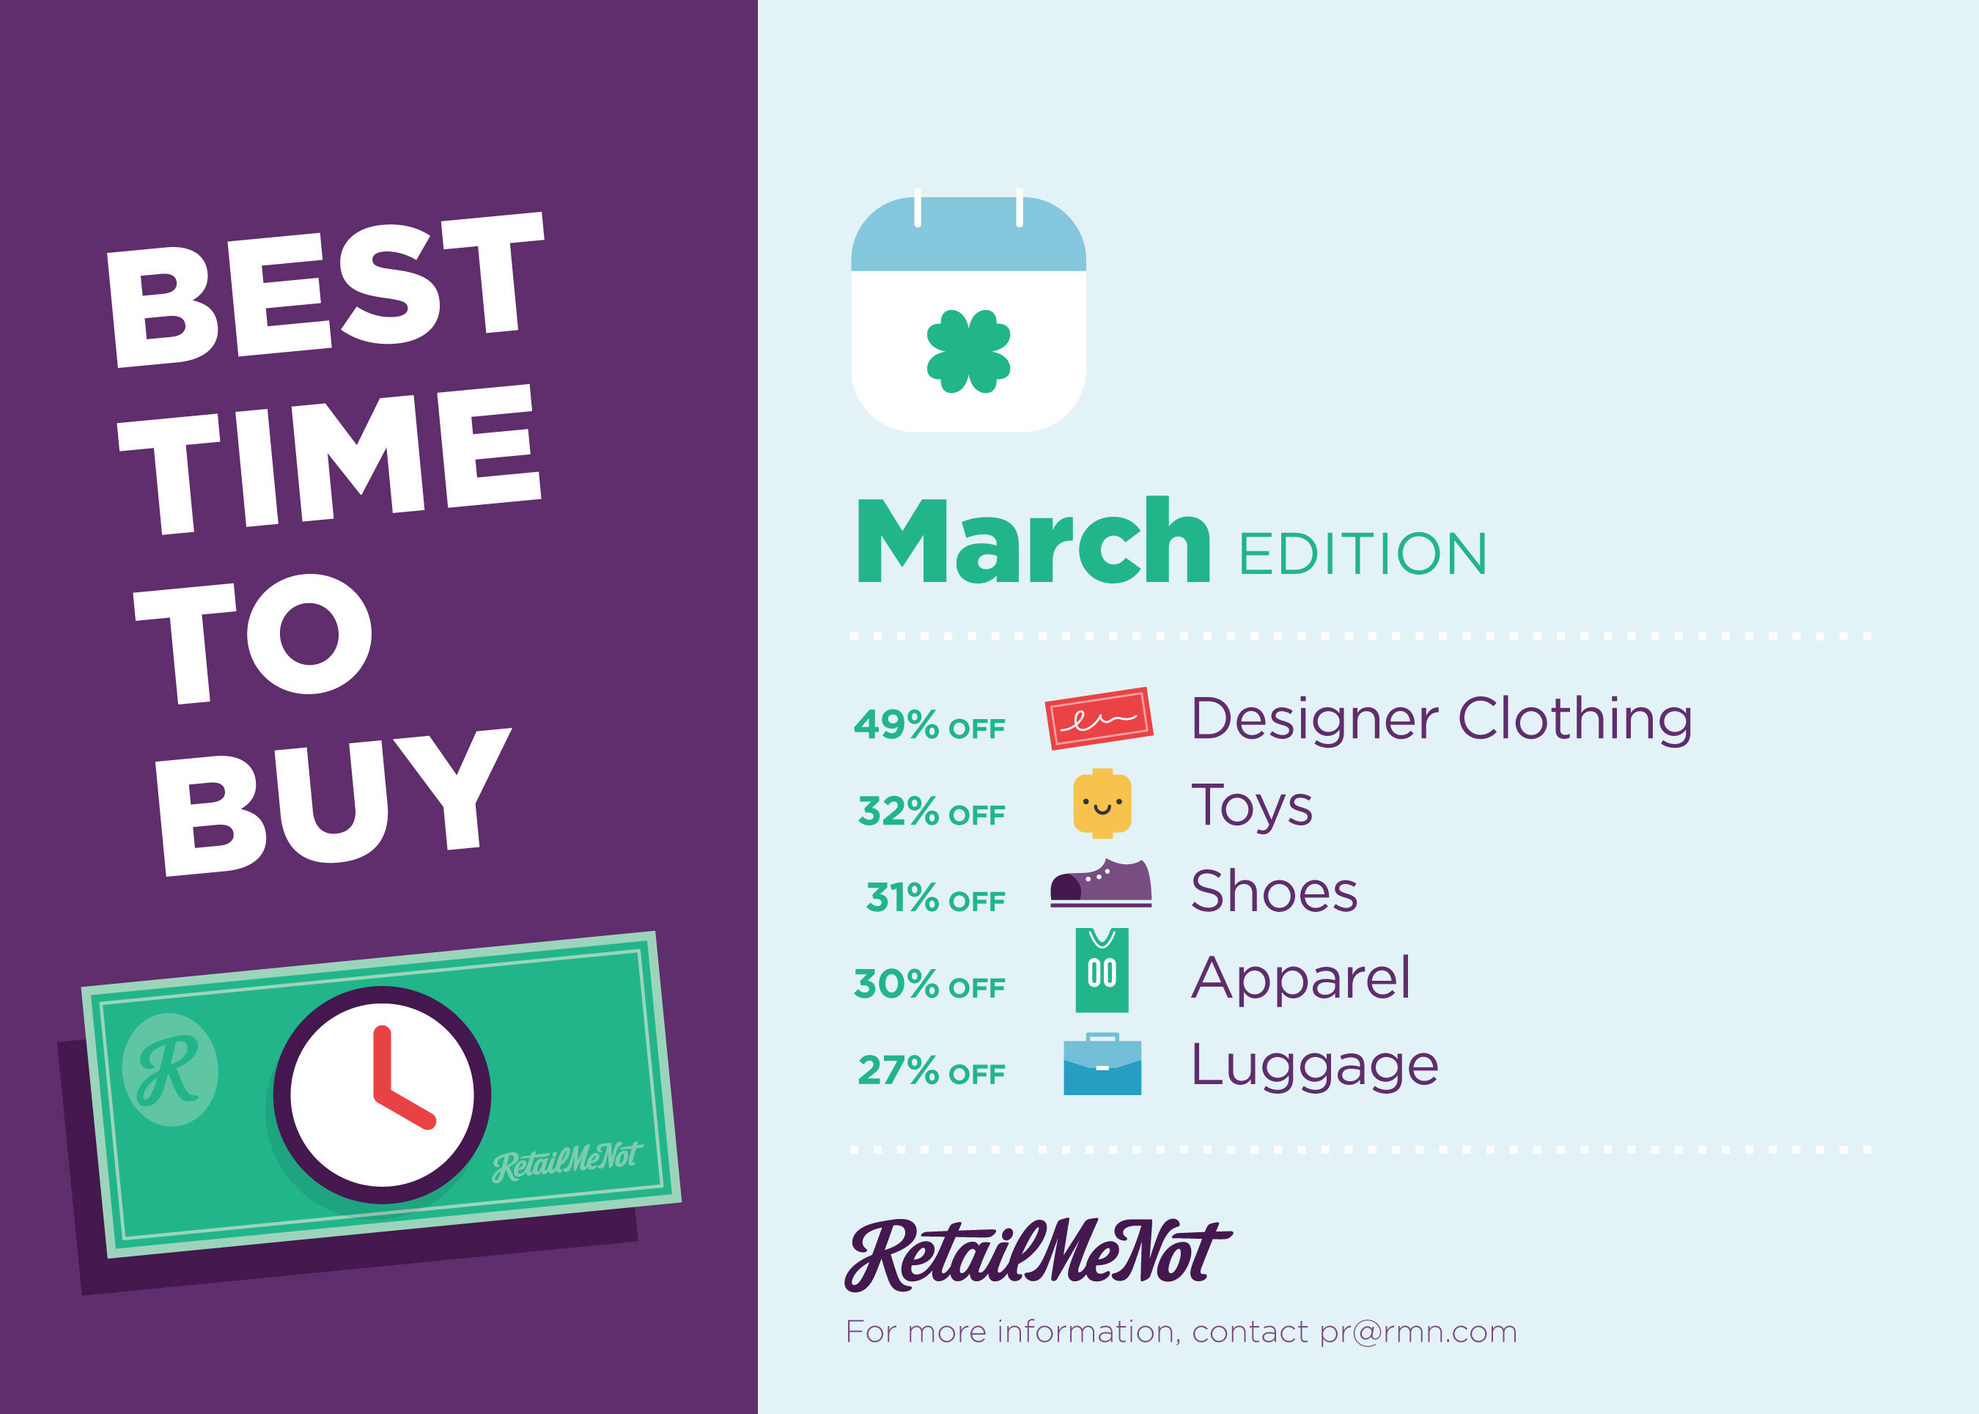 RetailMeNot Finds Designer Clothing, Shoes, Luggage and More Are the Best  Things to Buy in March